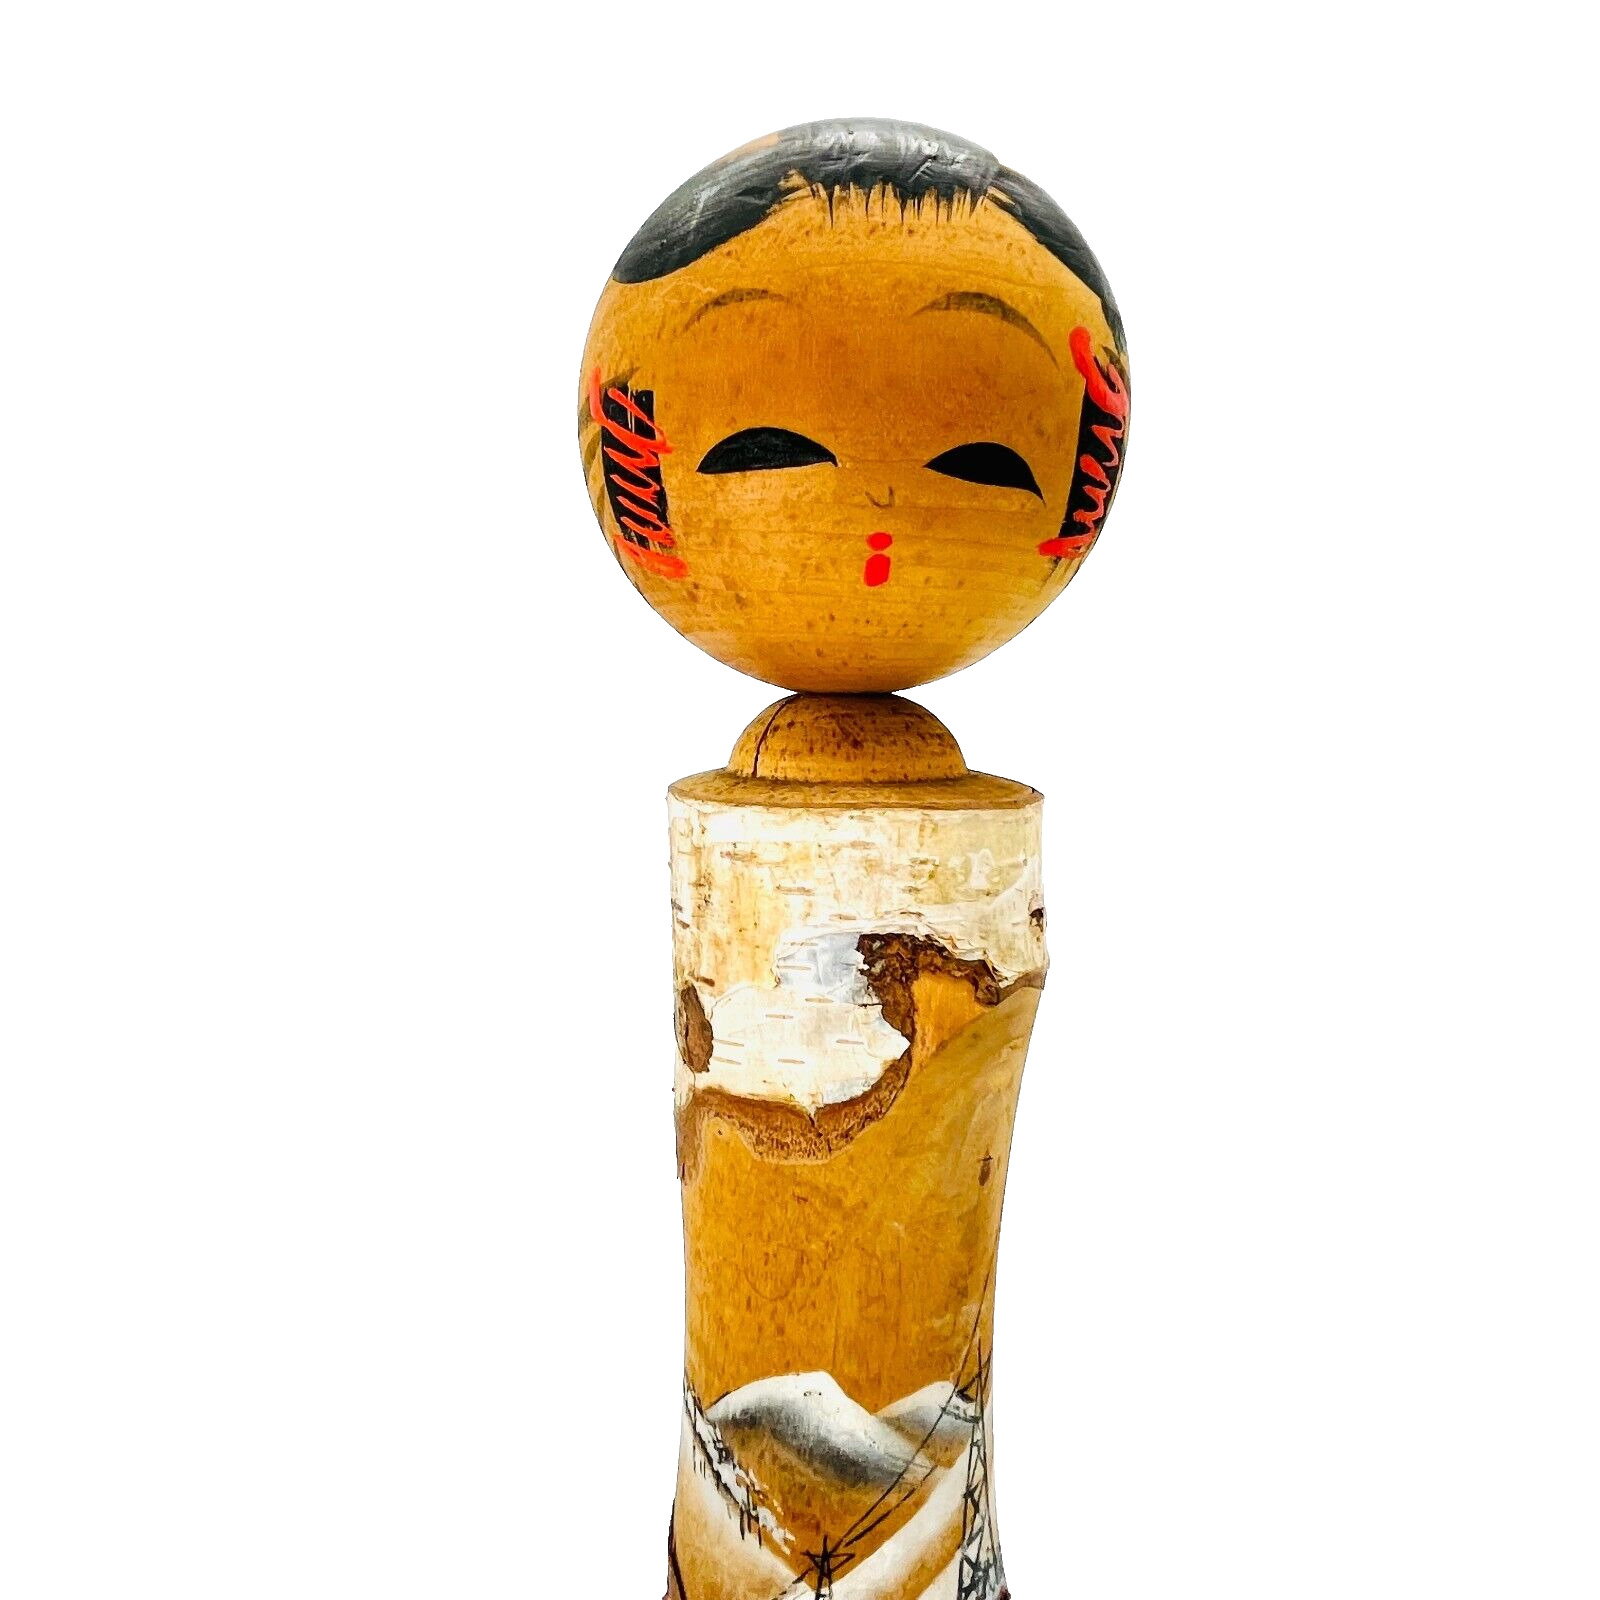 Japanese Wooden Kokeshi Doll Vintage Figurine Traditional Craft Toy  1960 12in